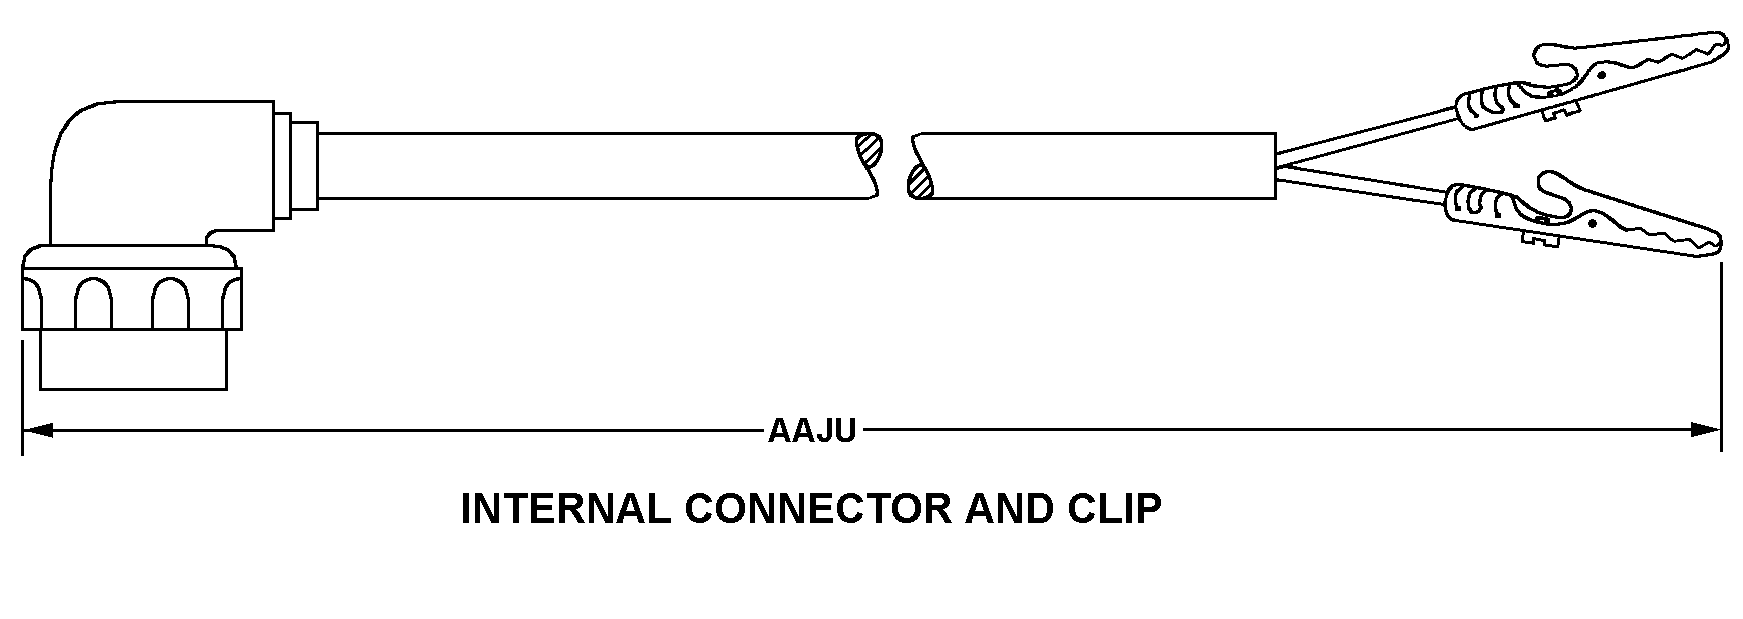 INTERNAL CONNECTOR AND CLIP style nsn 6150-00-438-3311